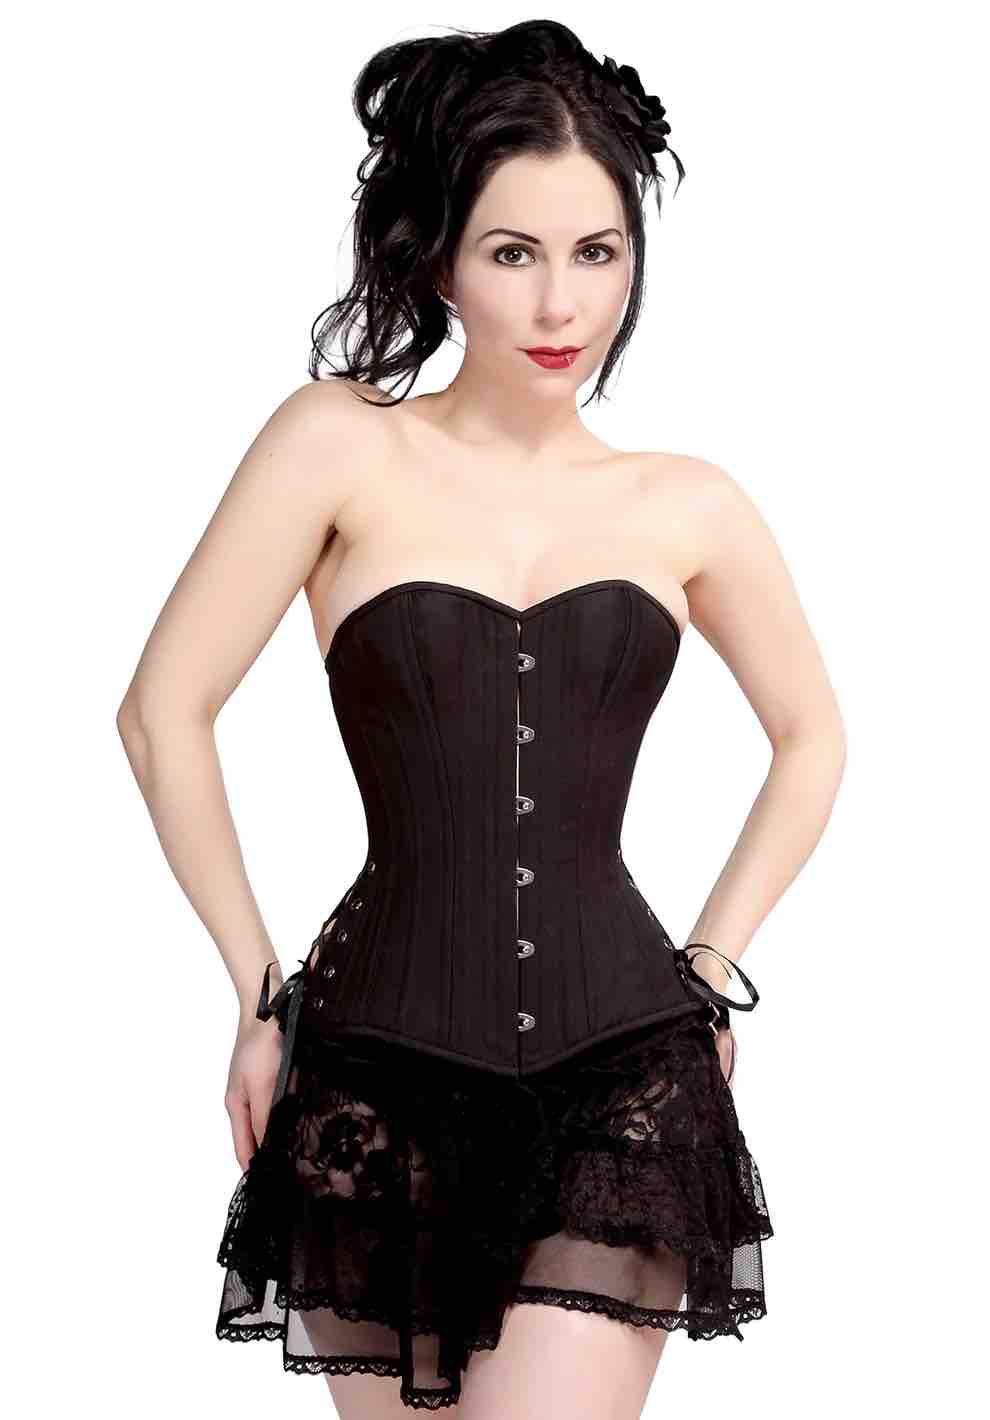 A model wearing the Black Cotton Cashmere Slim Corset over a black lace skirt.